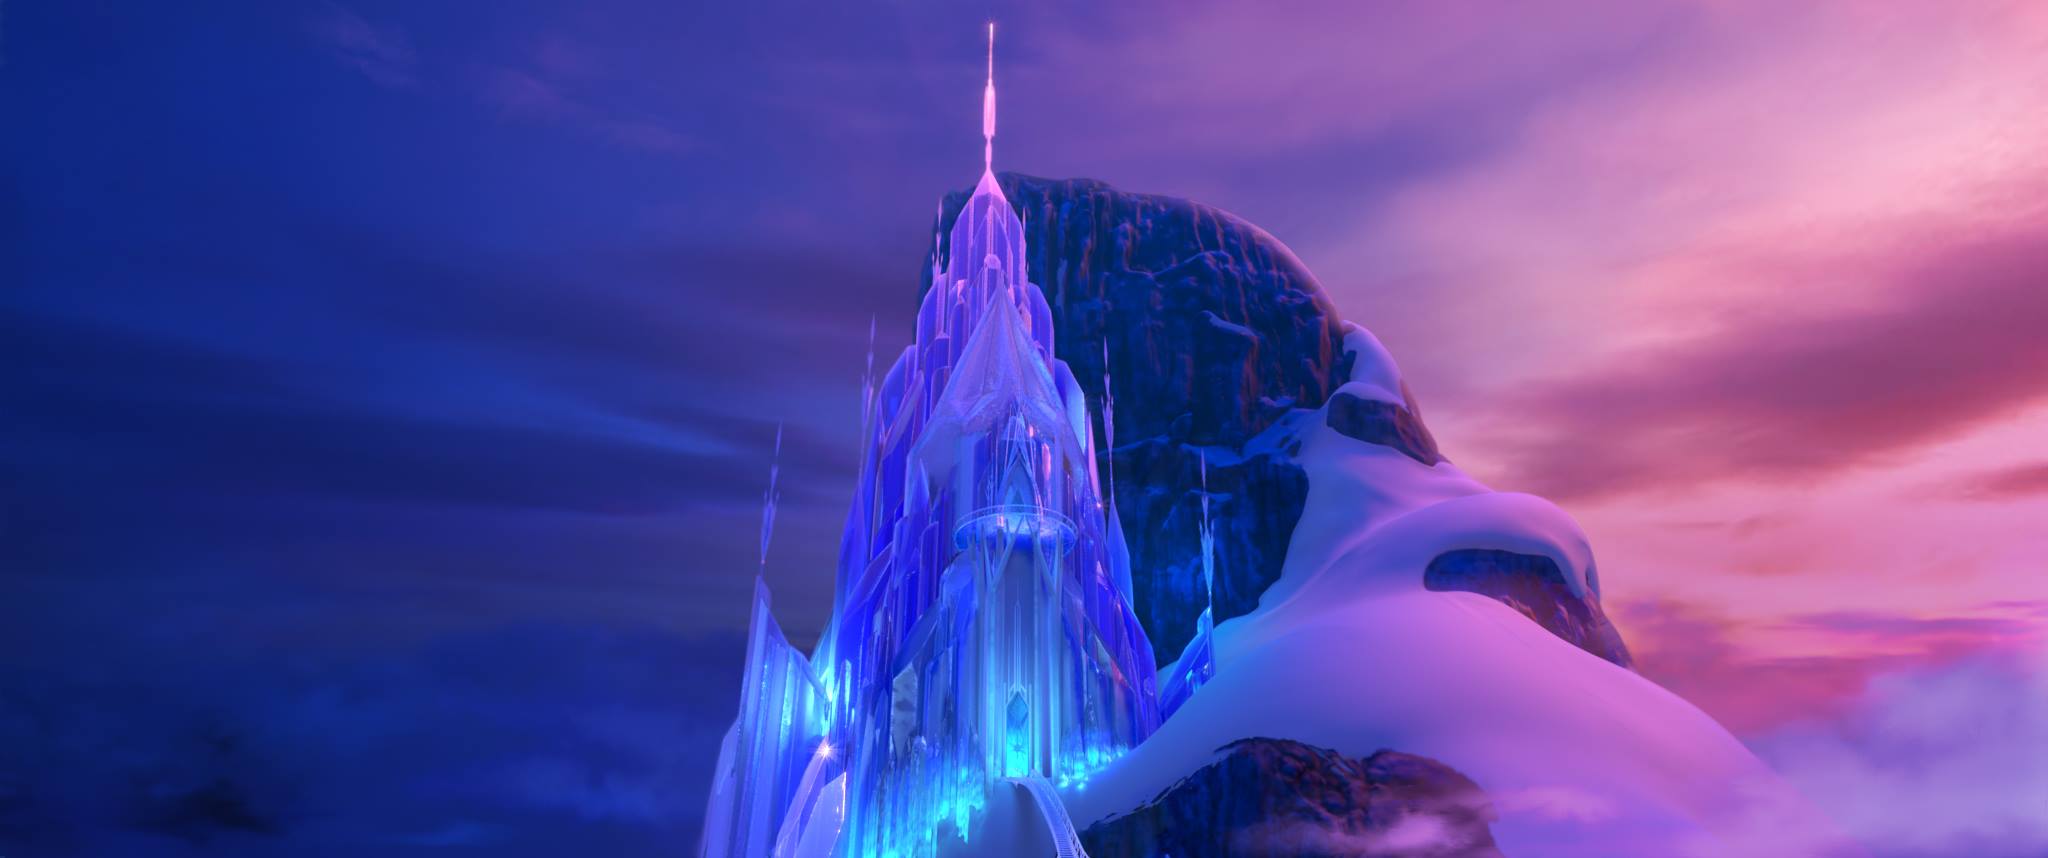 New 'Frozen' Image Show Off Elsa's Ice Palace, Arendelle & More!